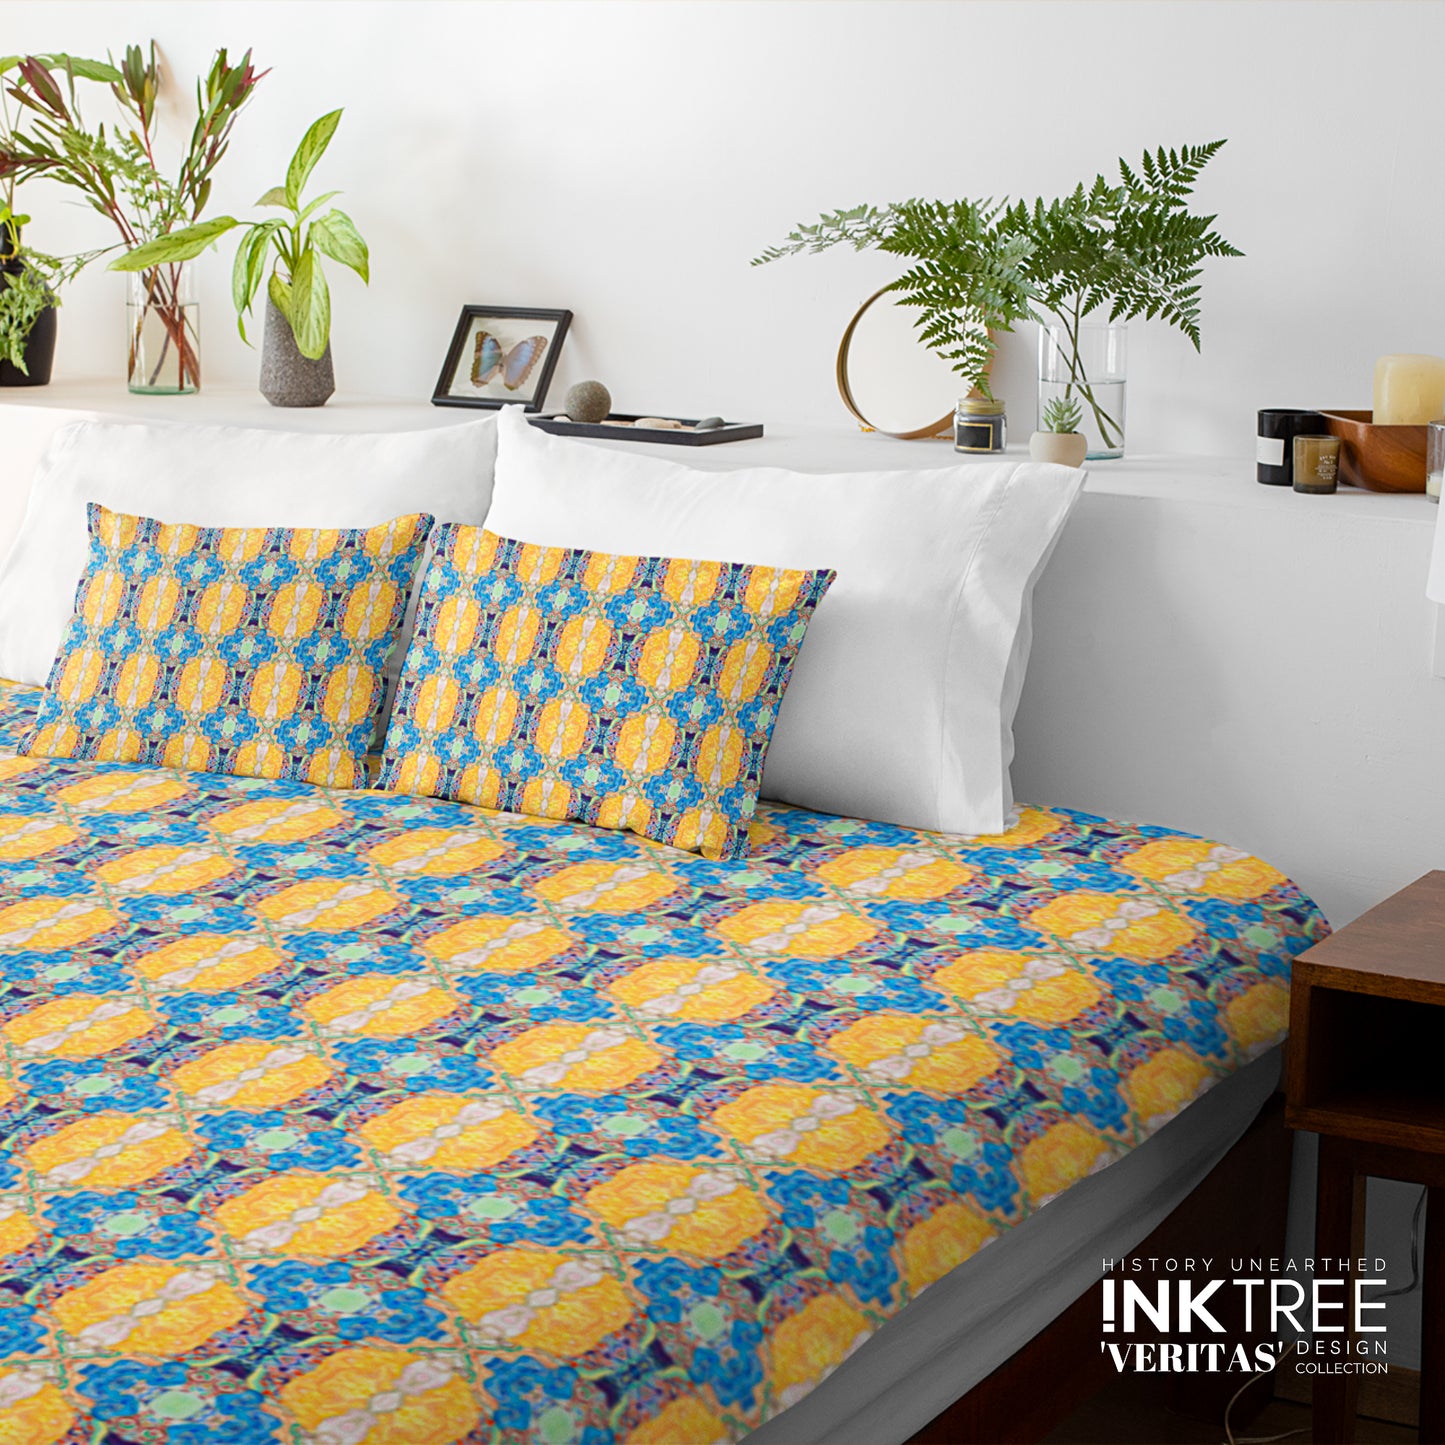 A doona cover and pillows with blue and yellow pattern against a white wall, leaning against white pillows and green plants in vases.